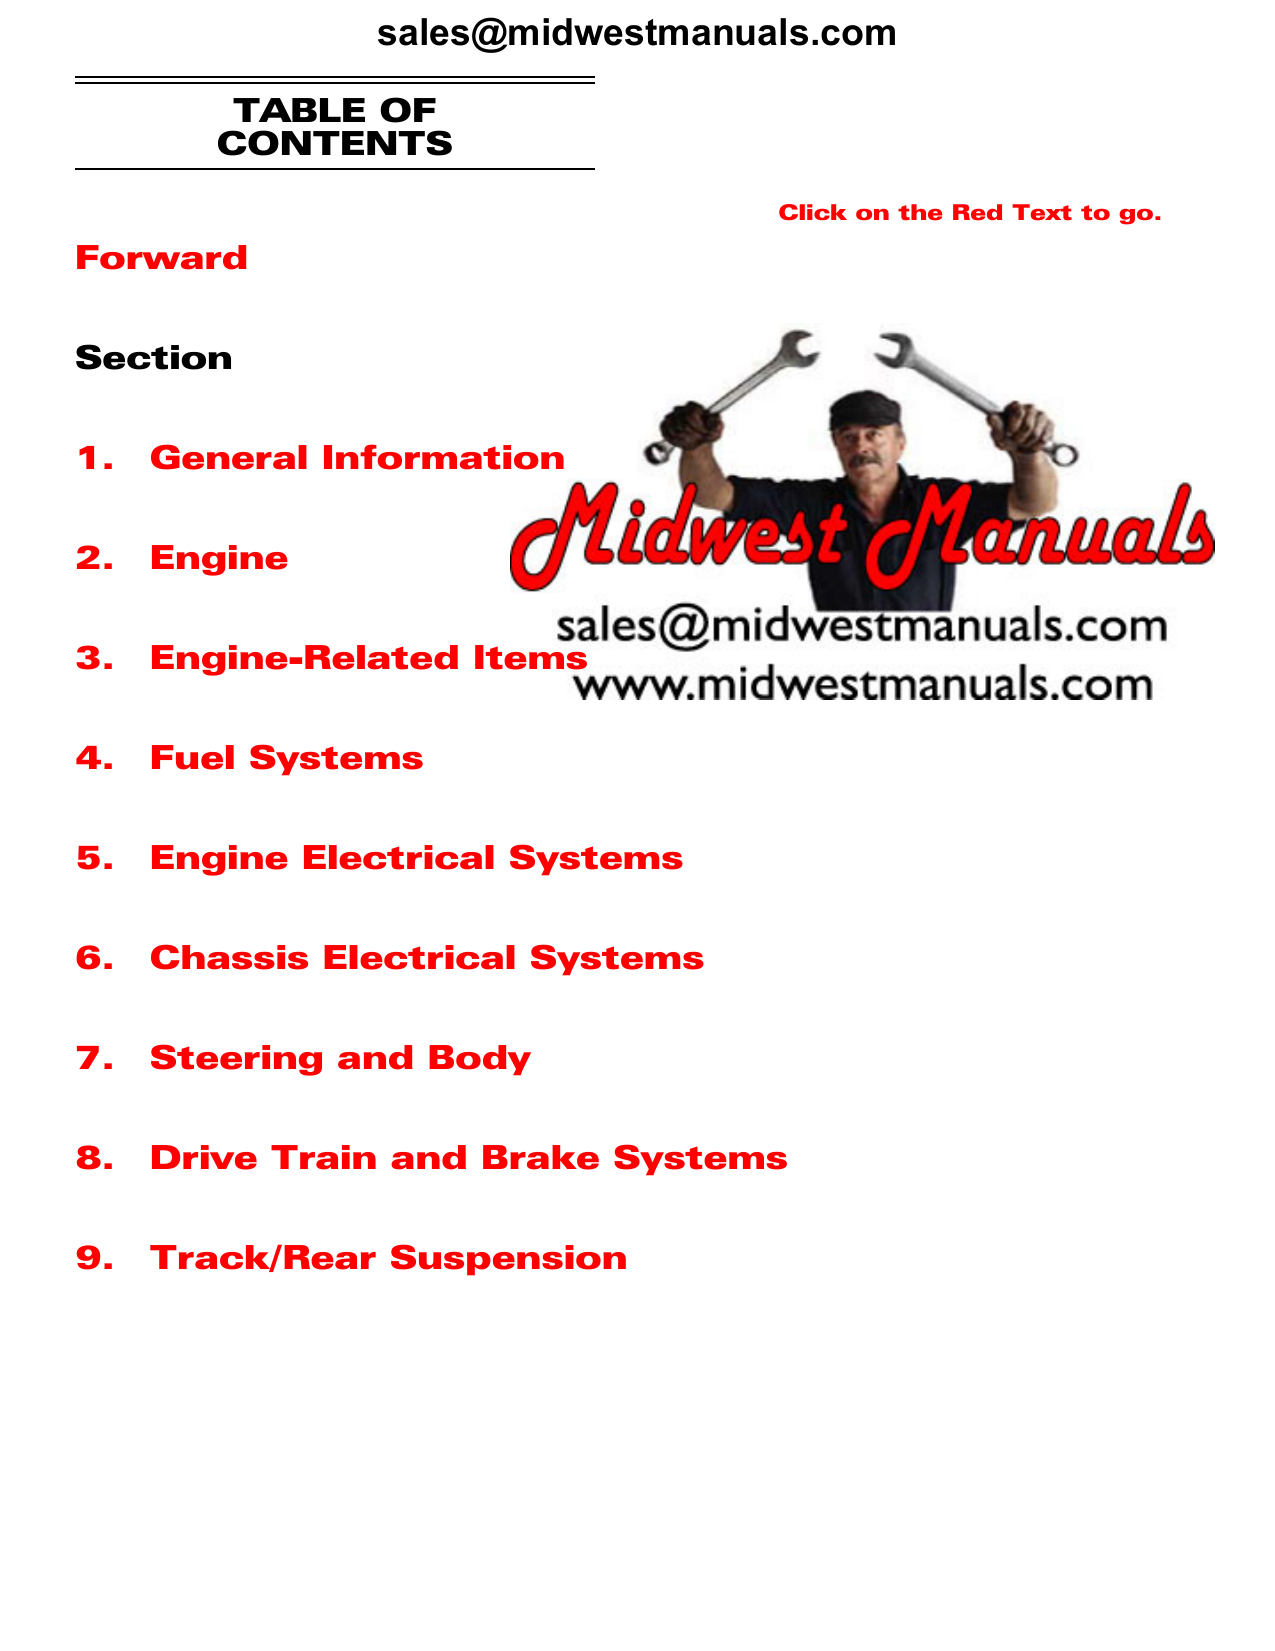 2006 Arctic Cat 2- and 4-stroke snowmobile service, shop manual Preview image 2